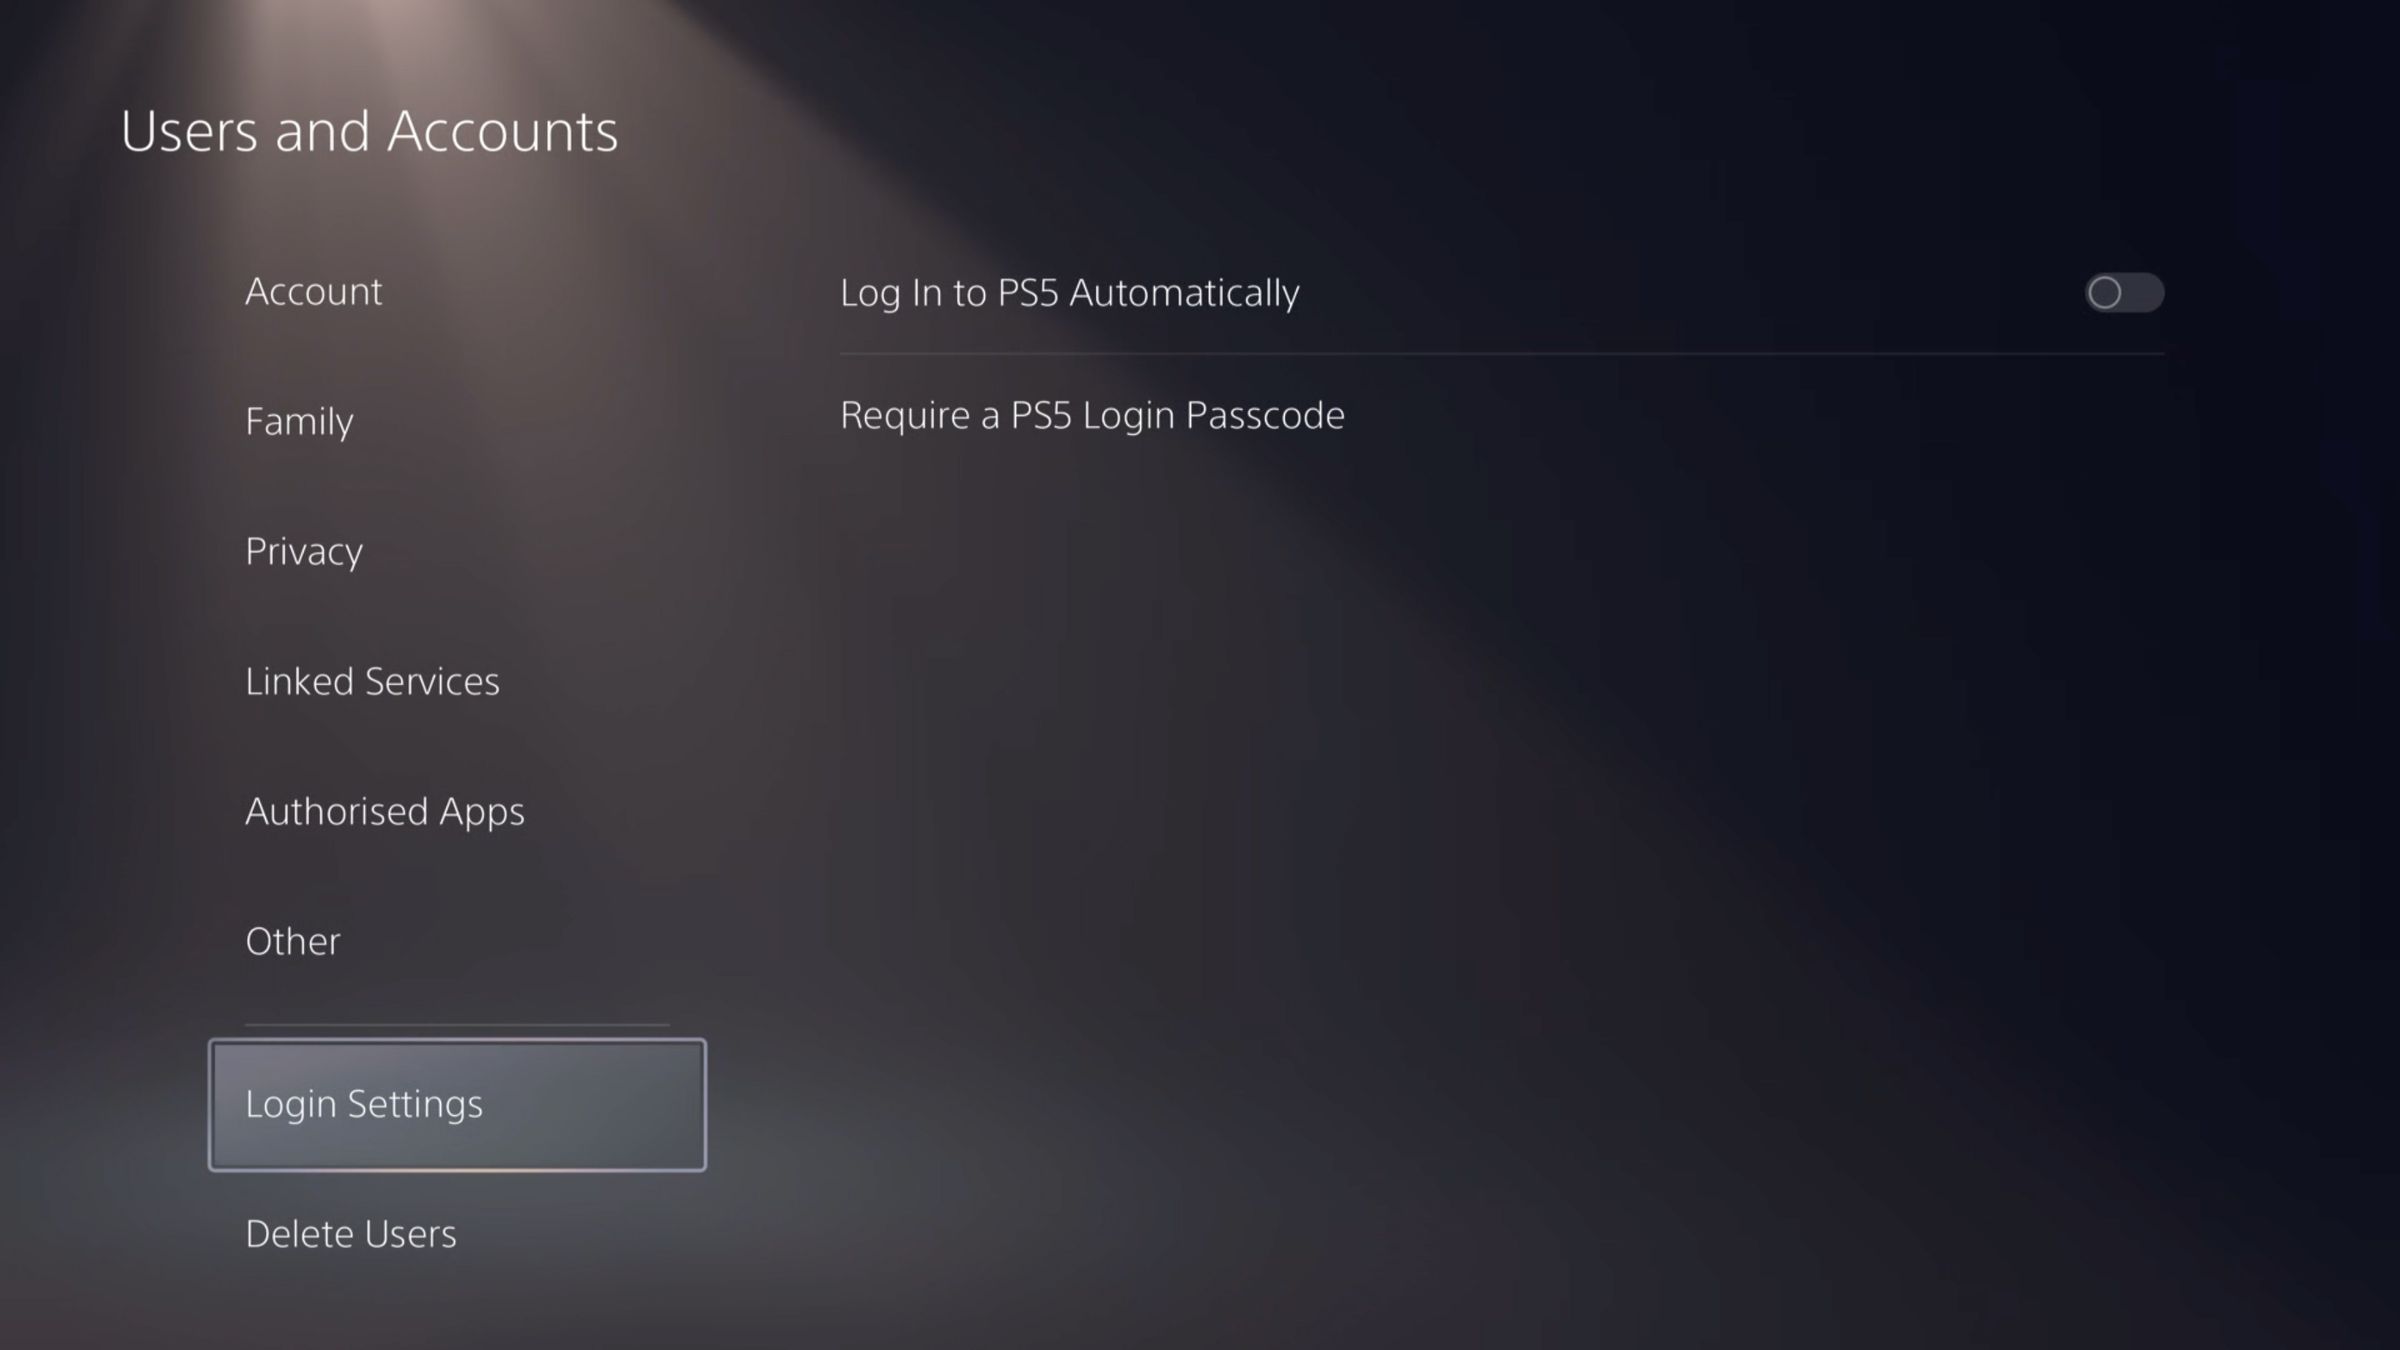 Page headed Users and Accounts with a list of options on the left, Login Settings highlighted, and on the right, two options: Log in to PS5 Automatically, and Require a PS5 Login Passcode